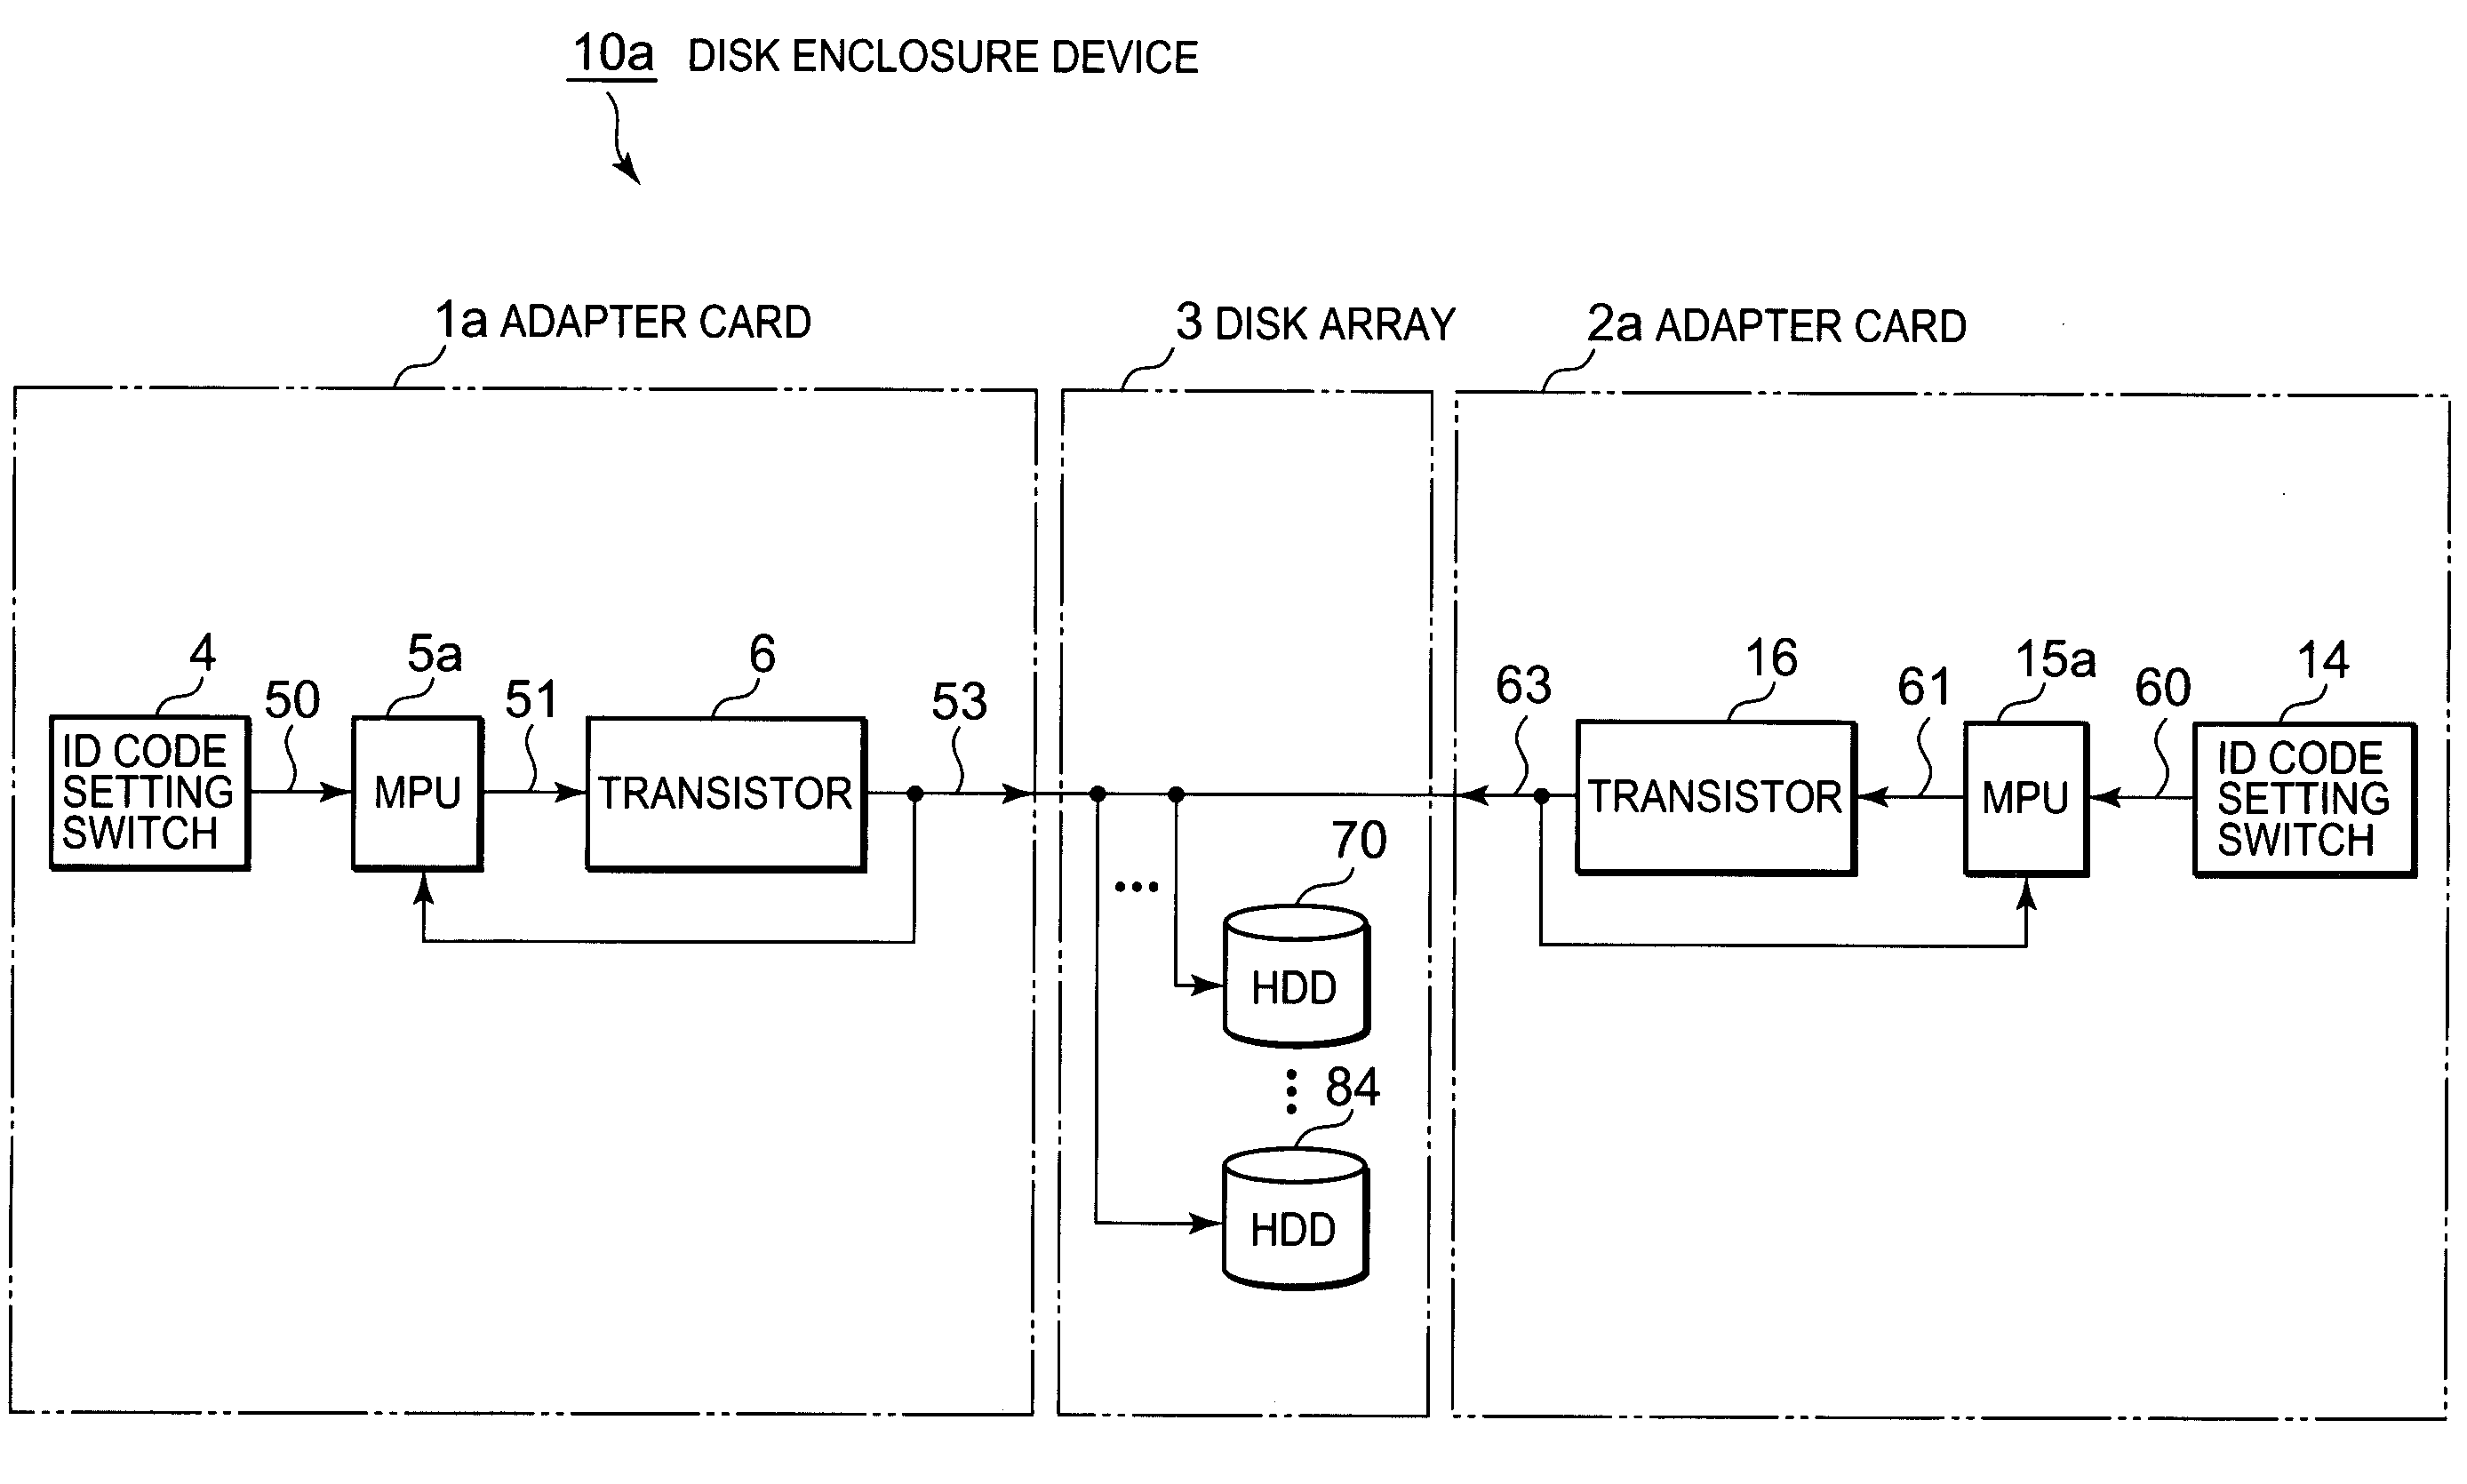 Controller for a disk, disk enclosure device, disk array apparatus, method for detecting a fault of disk enclosure device, and signal-bearing medium